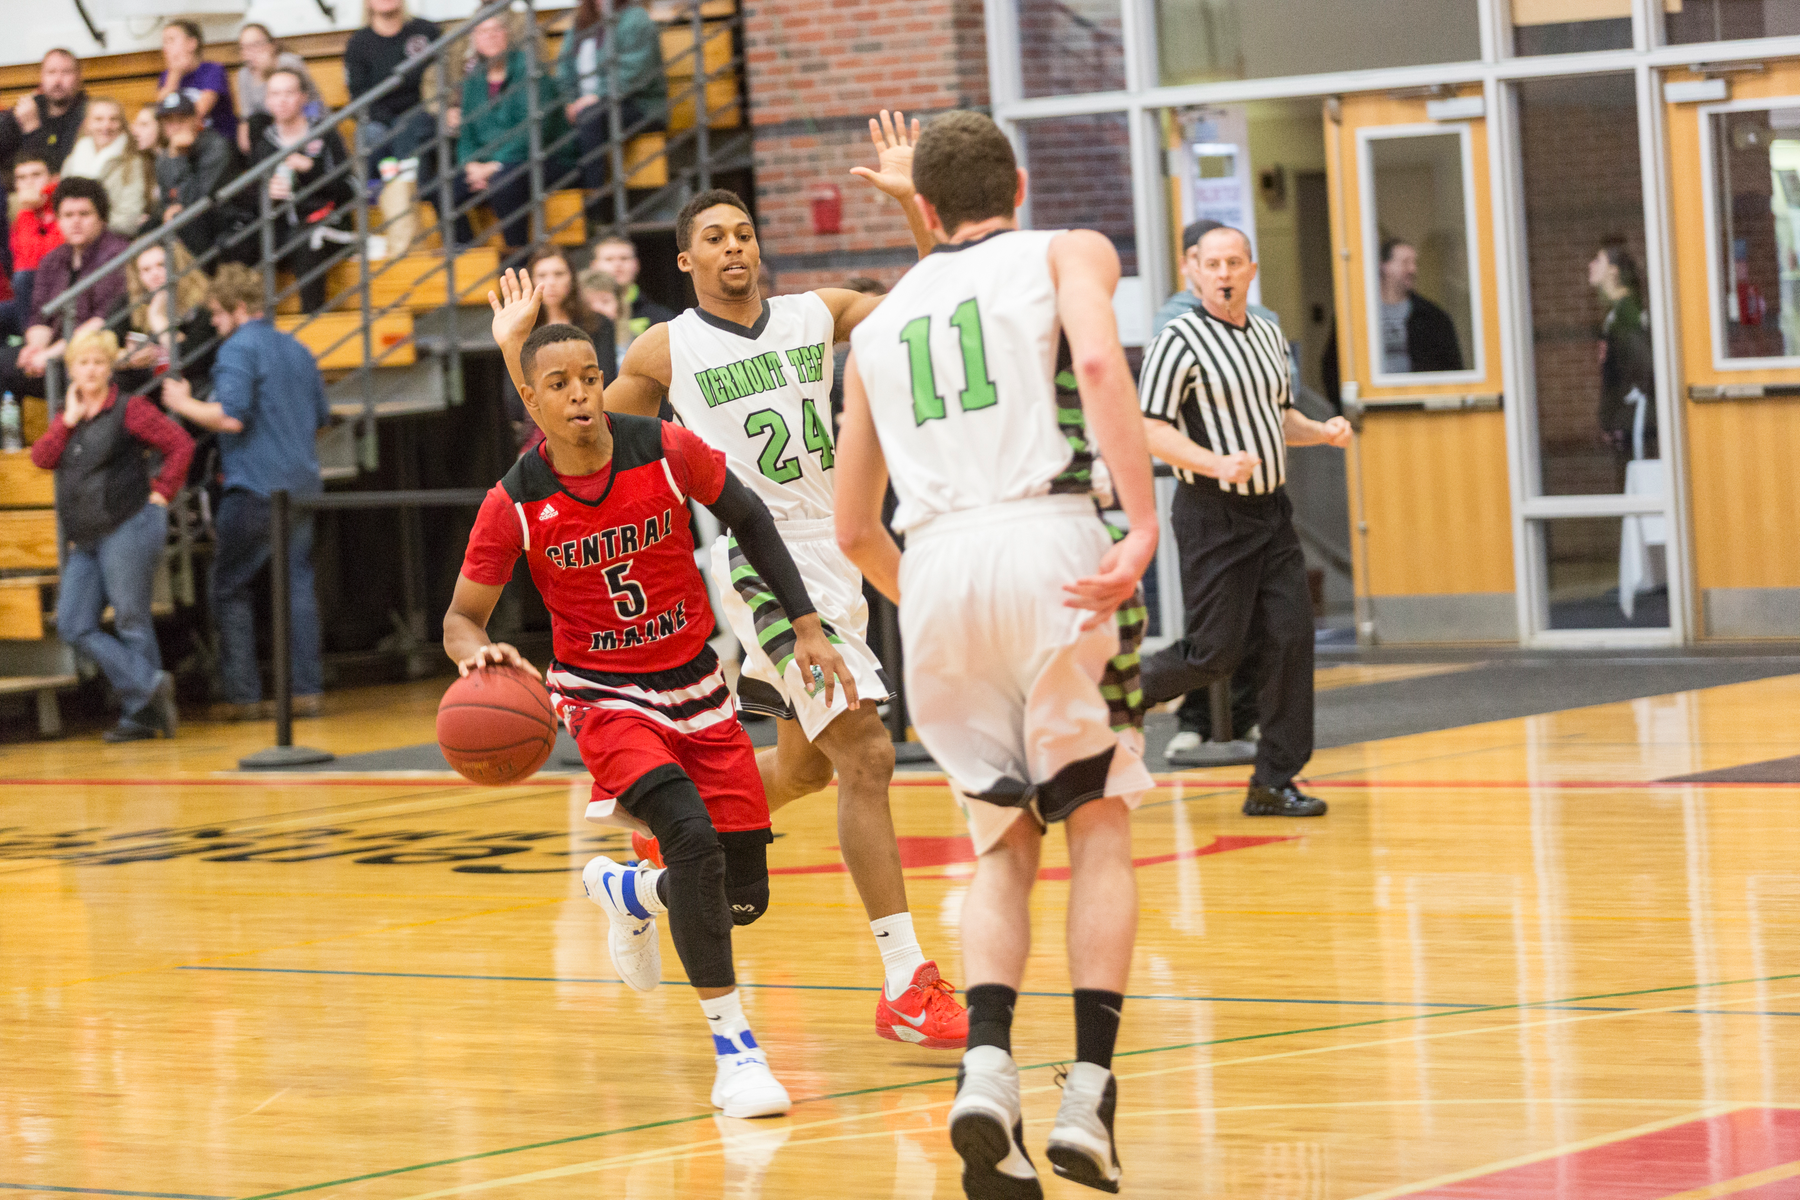 Home Crowd Leads Mustangs to Victory Over SMCC